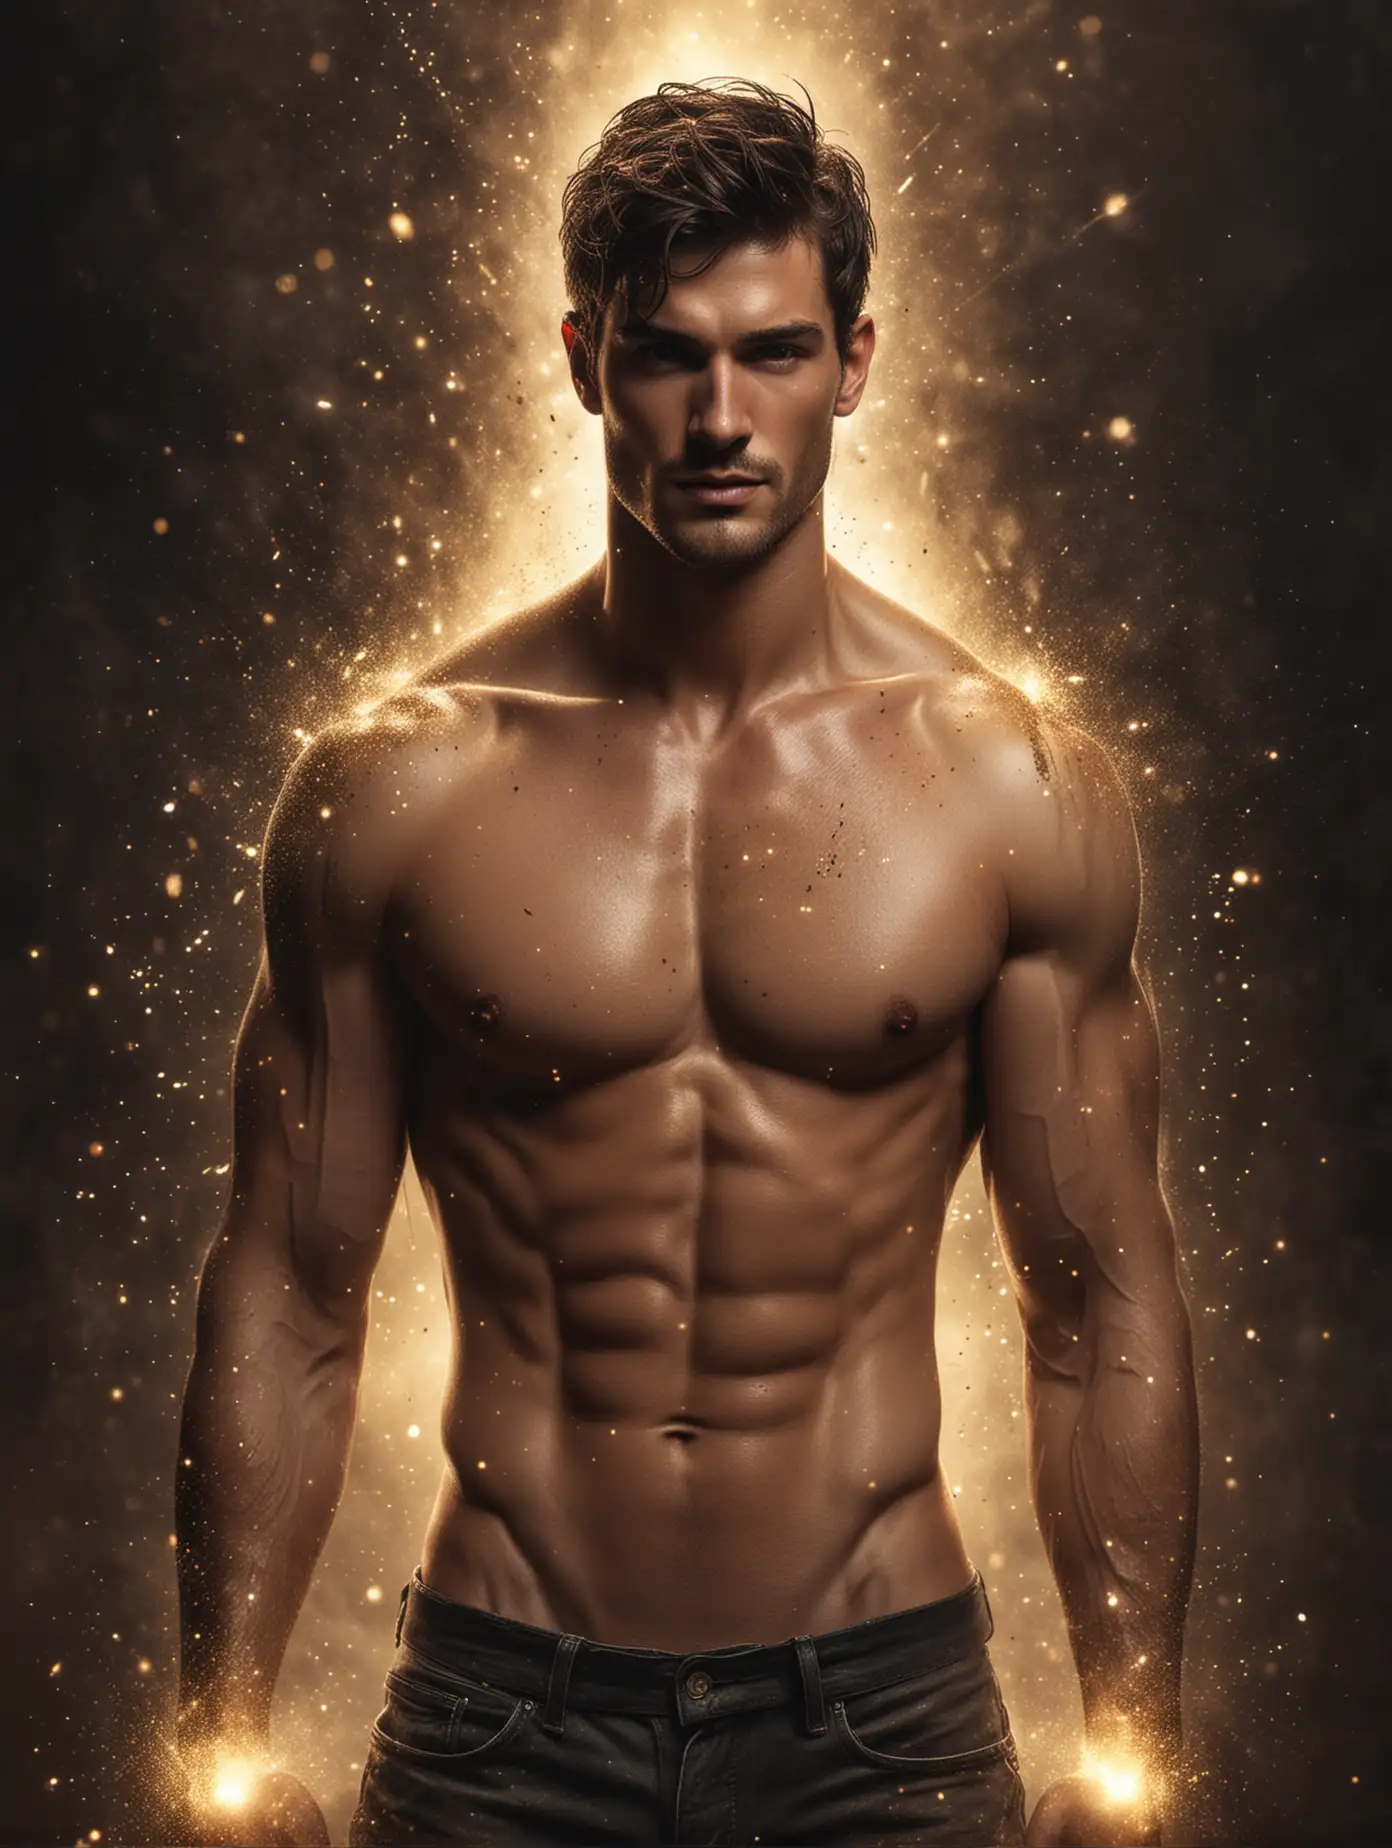 Sensual Shirtless Man Amidst Enigmatic Black Fog with Golden Sparks